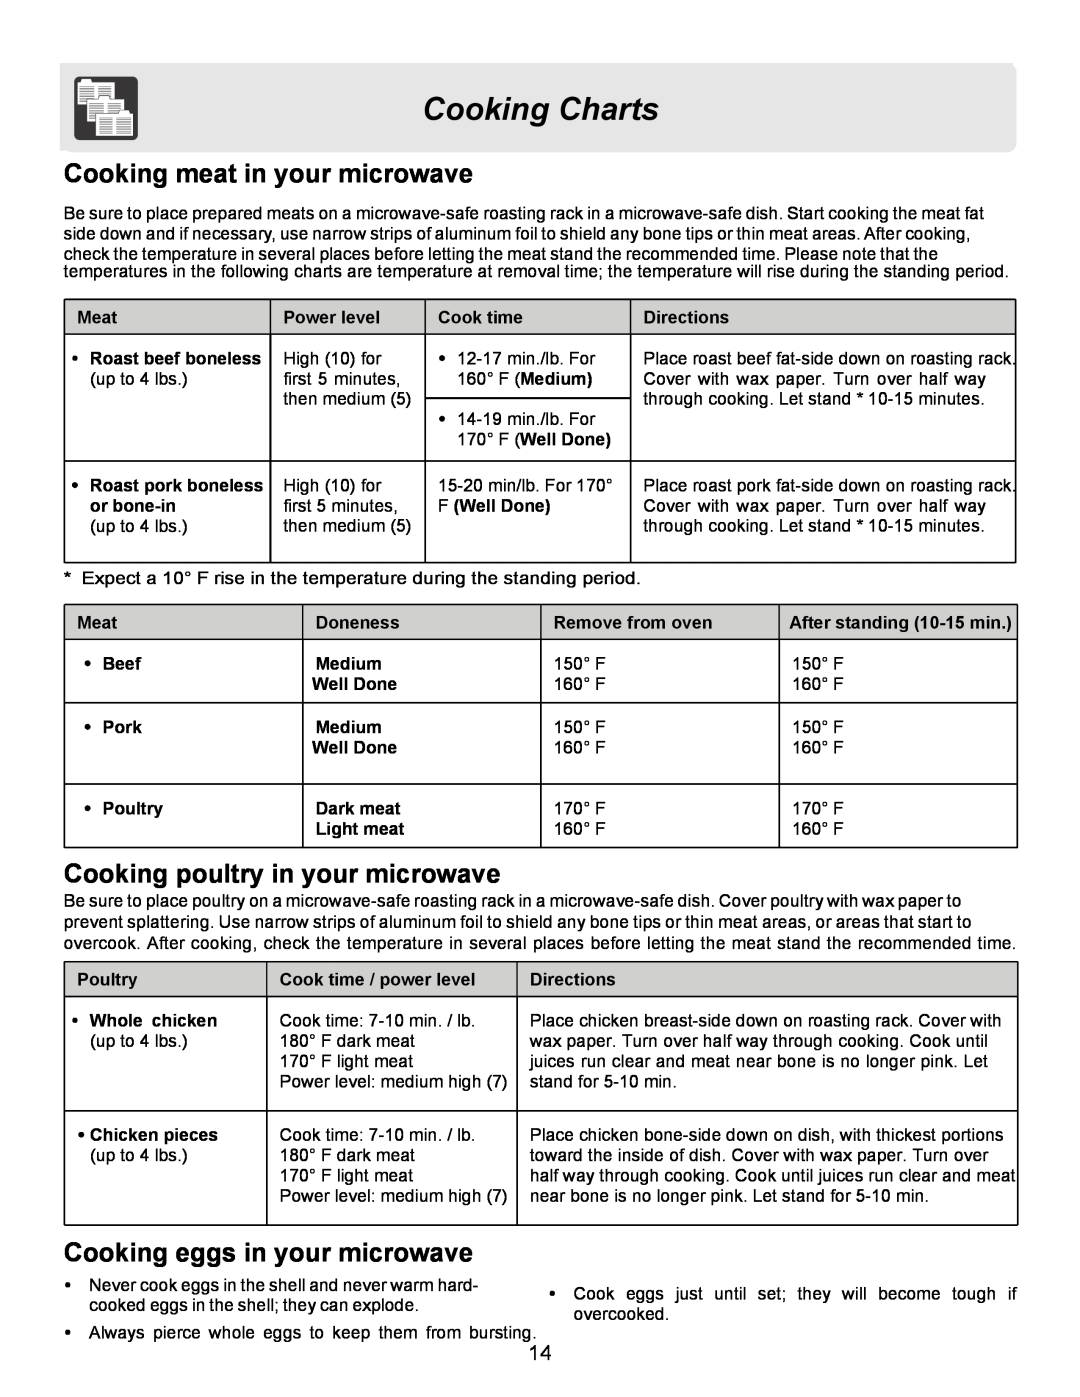 Frigidaire FFCE1638LW Cooking Charts, Cooking meat in your microwave, Cooking poultry in your microwave, Meat, Power level 